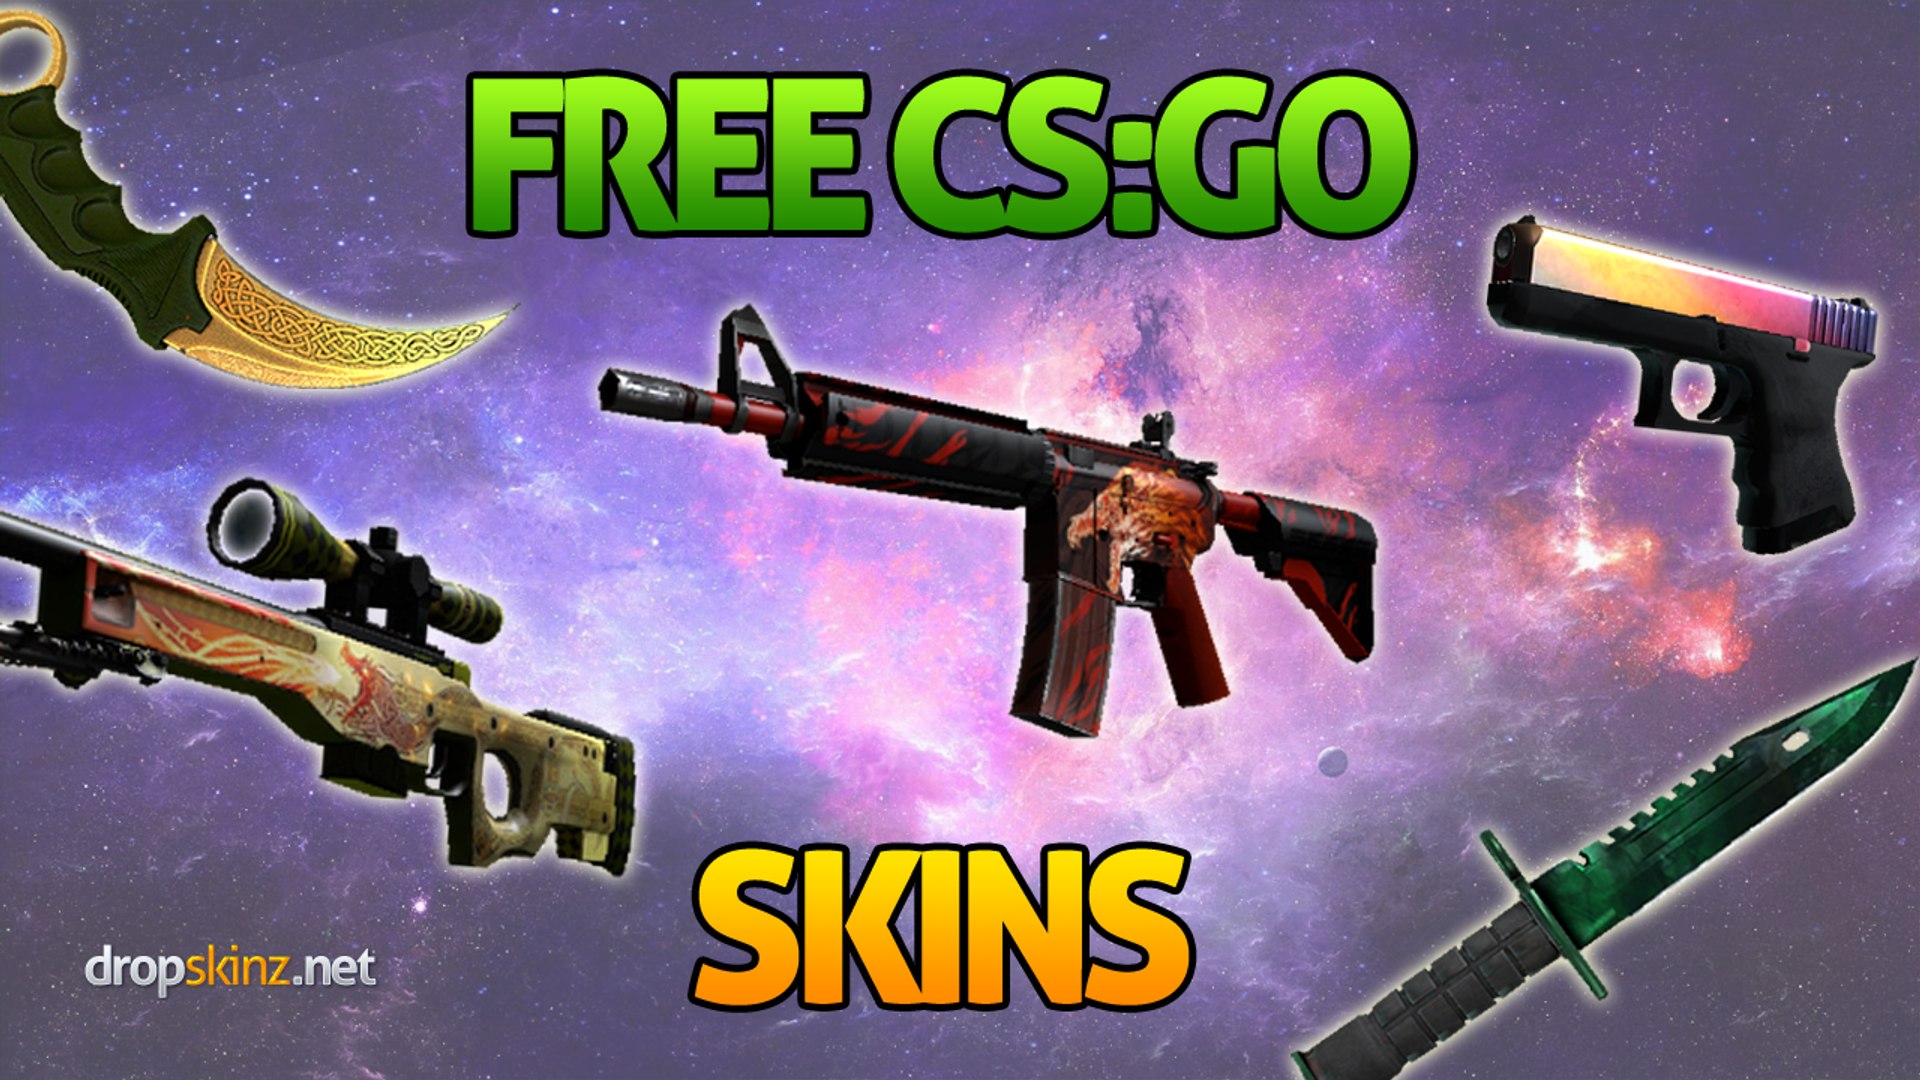 How to get FREE CSGO SKINS - video Dailymotion